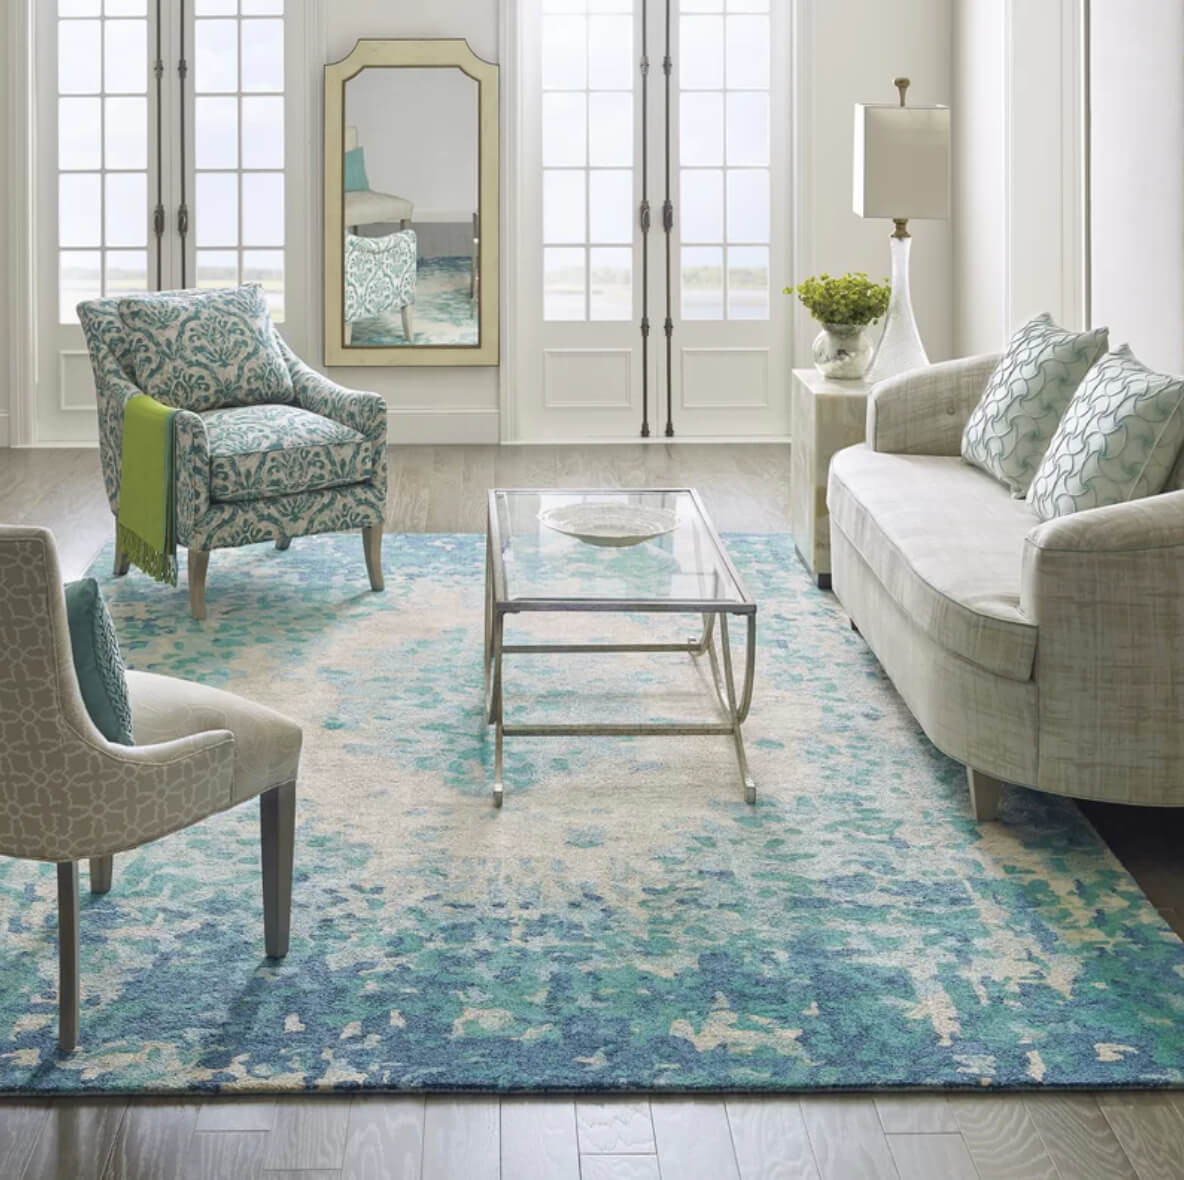 Rugs For Living Room Ideas
 12 Living Room Rug Ideas That Will Change Everything